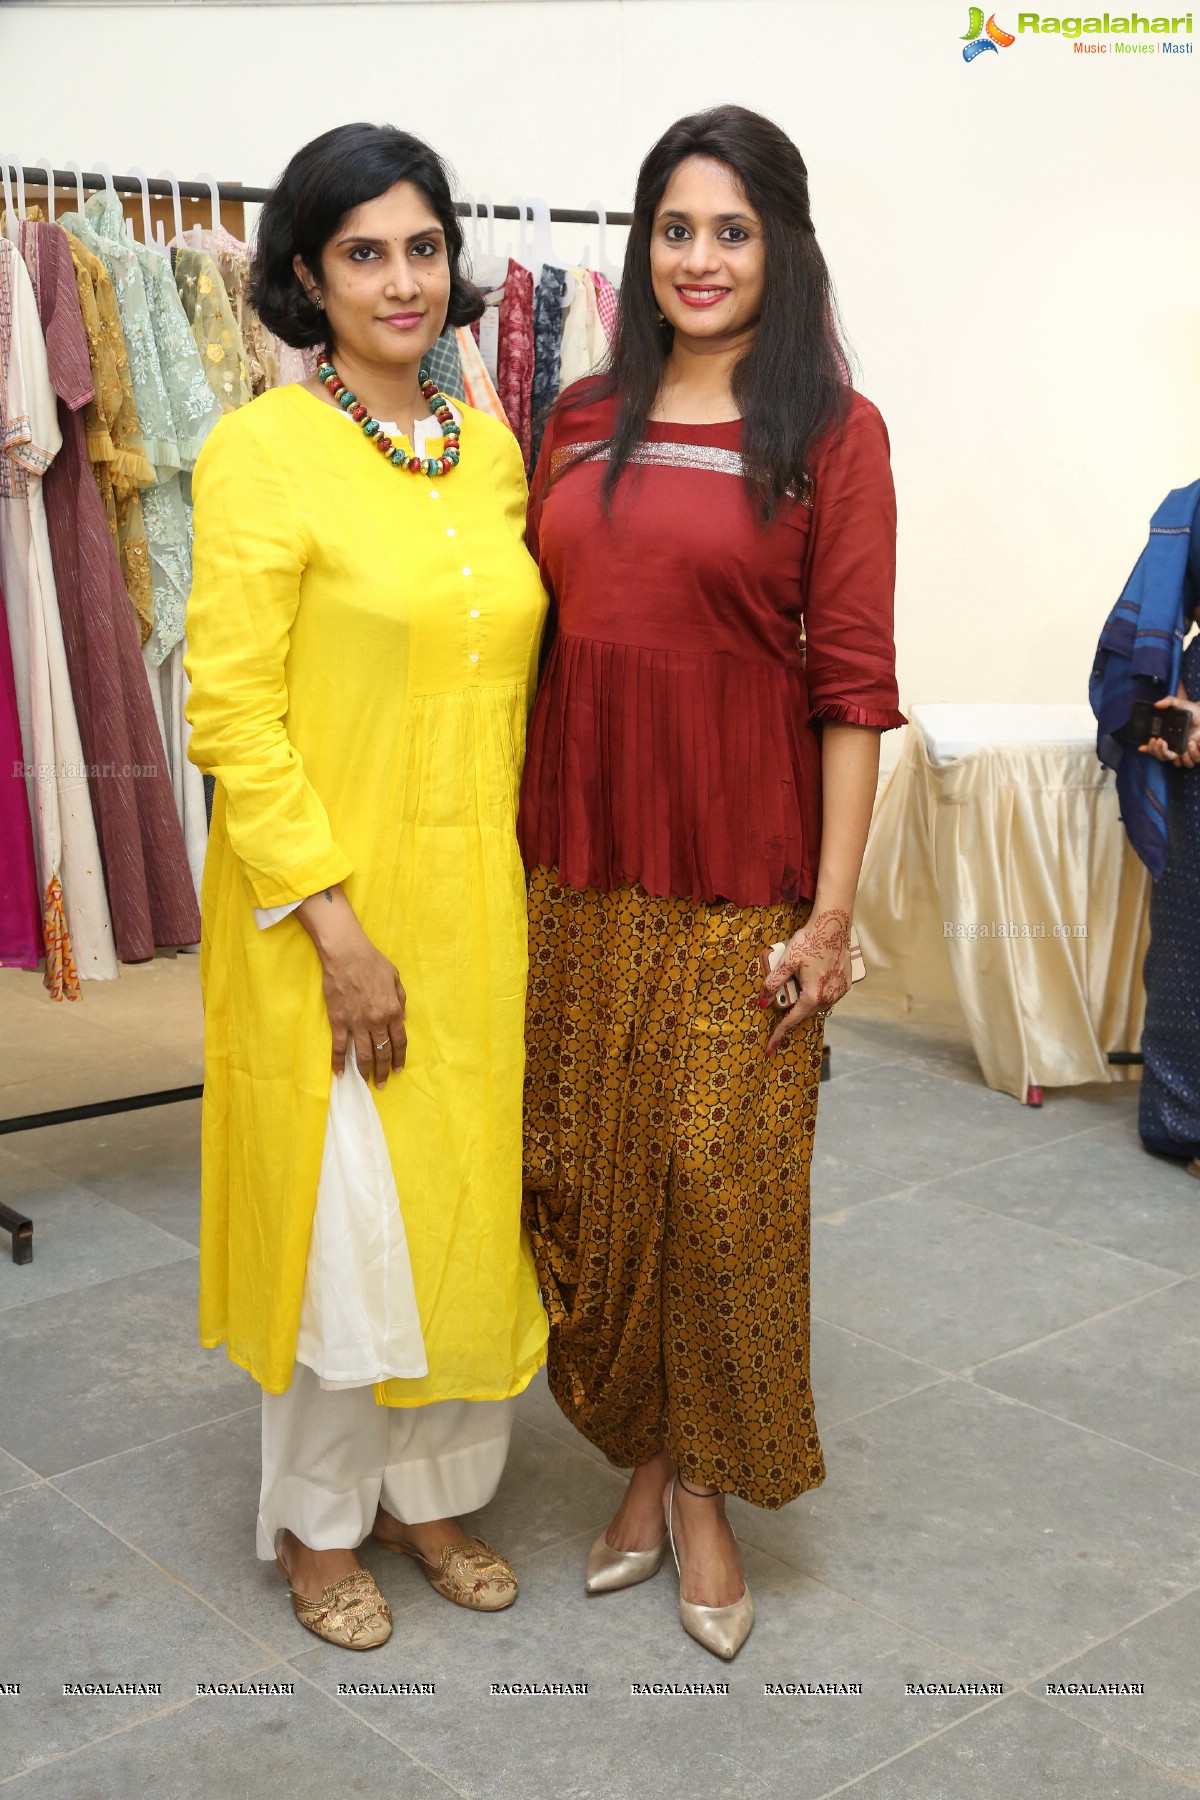 An exhibition and sale of diverse saree collections by Icchha Vastra 